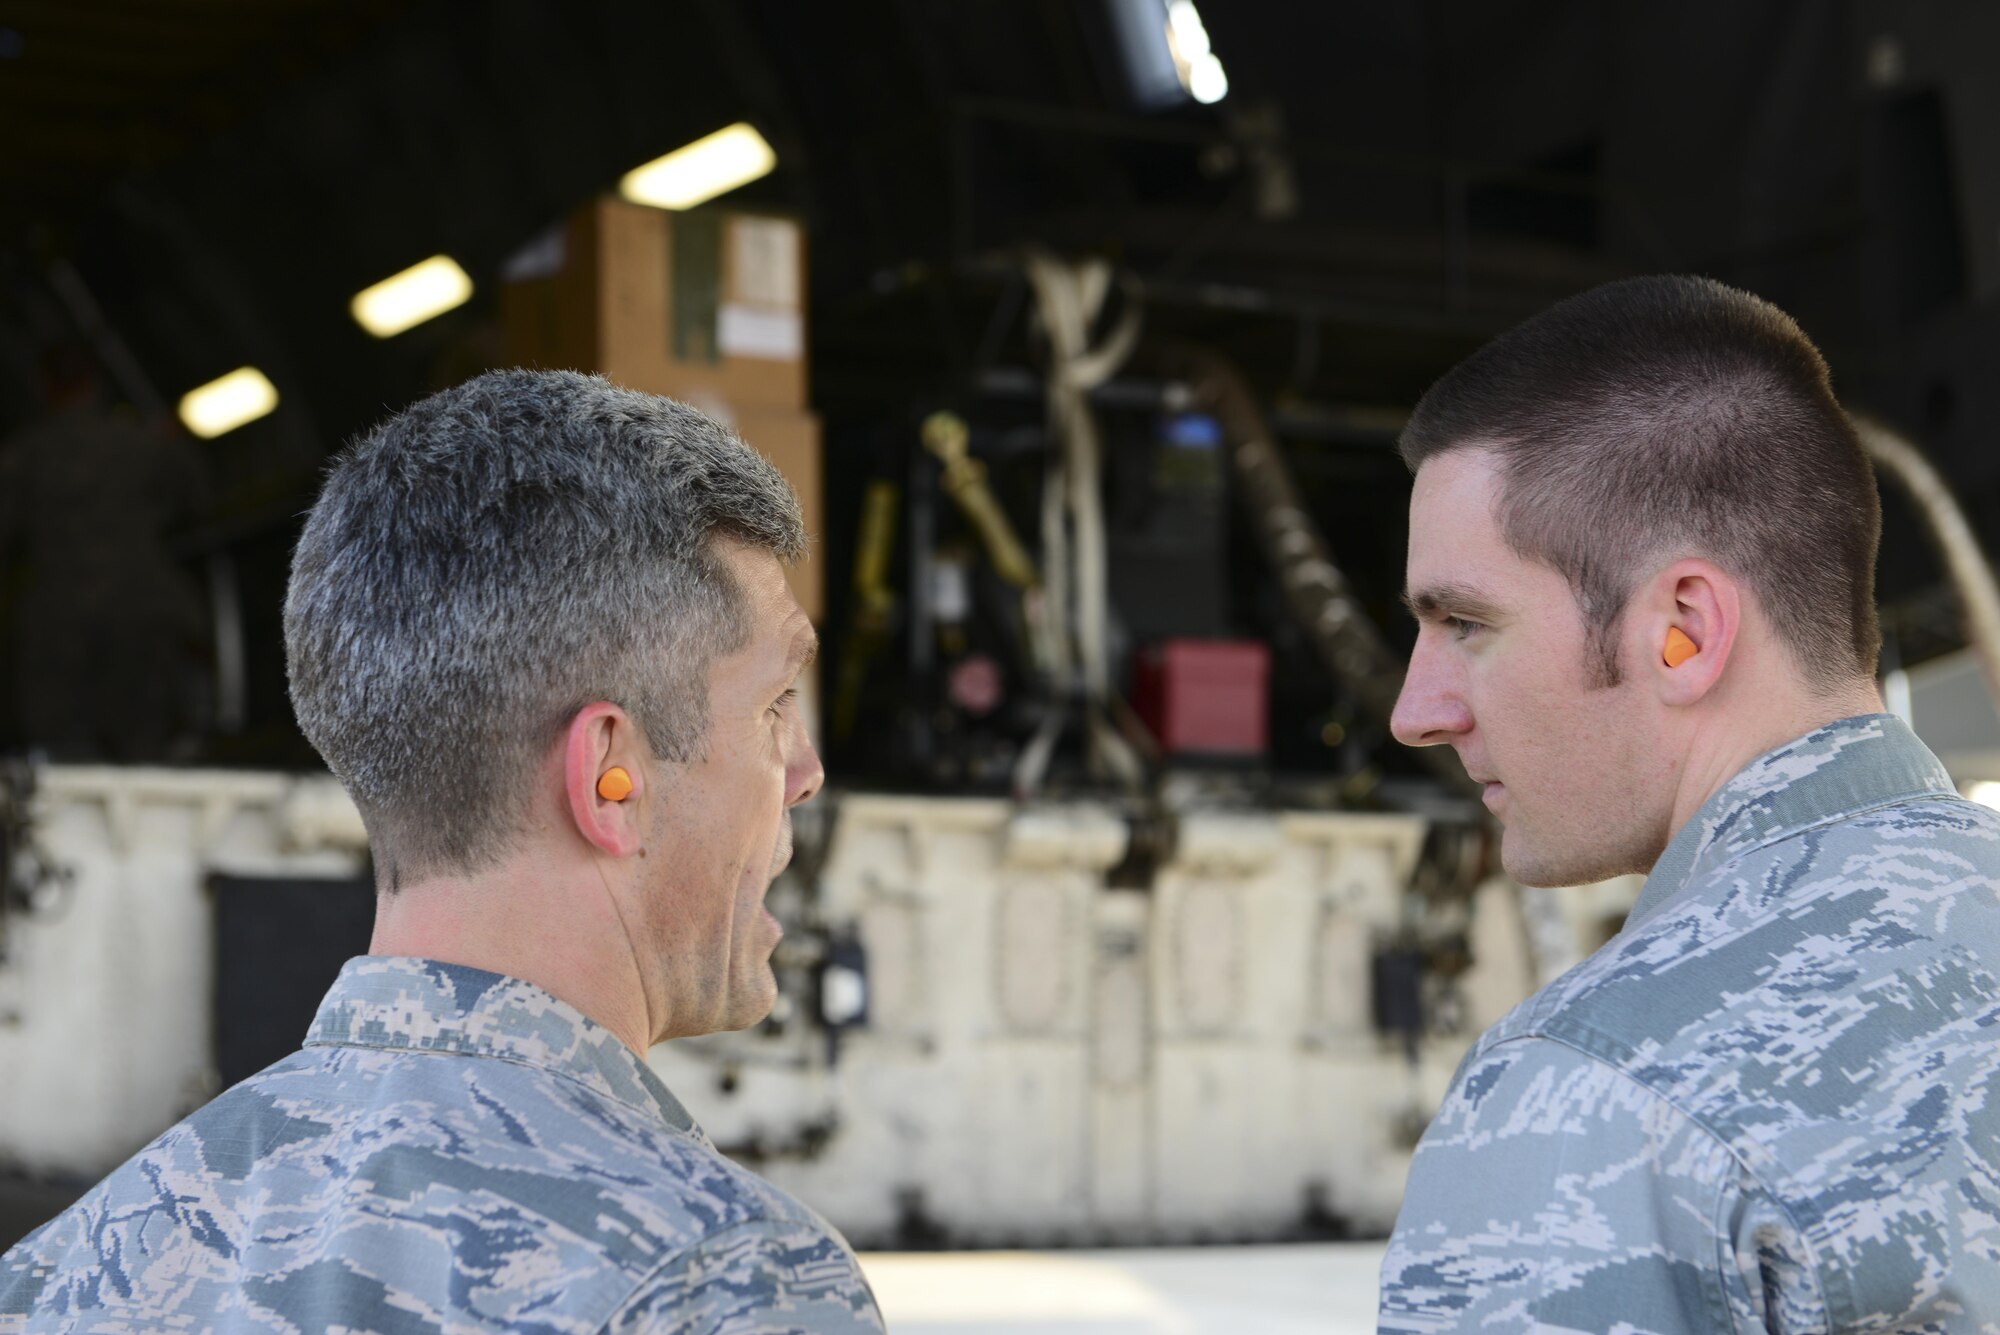 U.S. Air Force Lt. Col. Nathan Mansfield, 728th Air Mobility Squadron commander, speaks with Capt. Brian Jorgensen, 39th Logistics Readiness Squadron operations officer, about the aerial bulk fuel delivery system aboard a C-5M Super Galaxy July 22, 2016, at Incirlik Air Base, Turkey. The fuel system can hold up to 3,000 gallons of fuel. (U.S. Air Force photo by Tech. Sgt. Caleb Pierce)